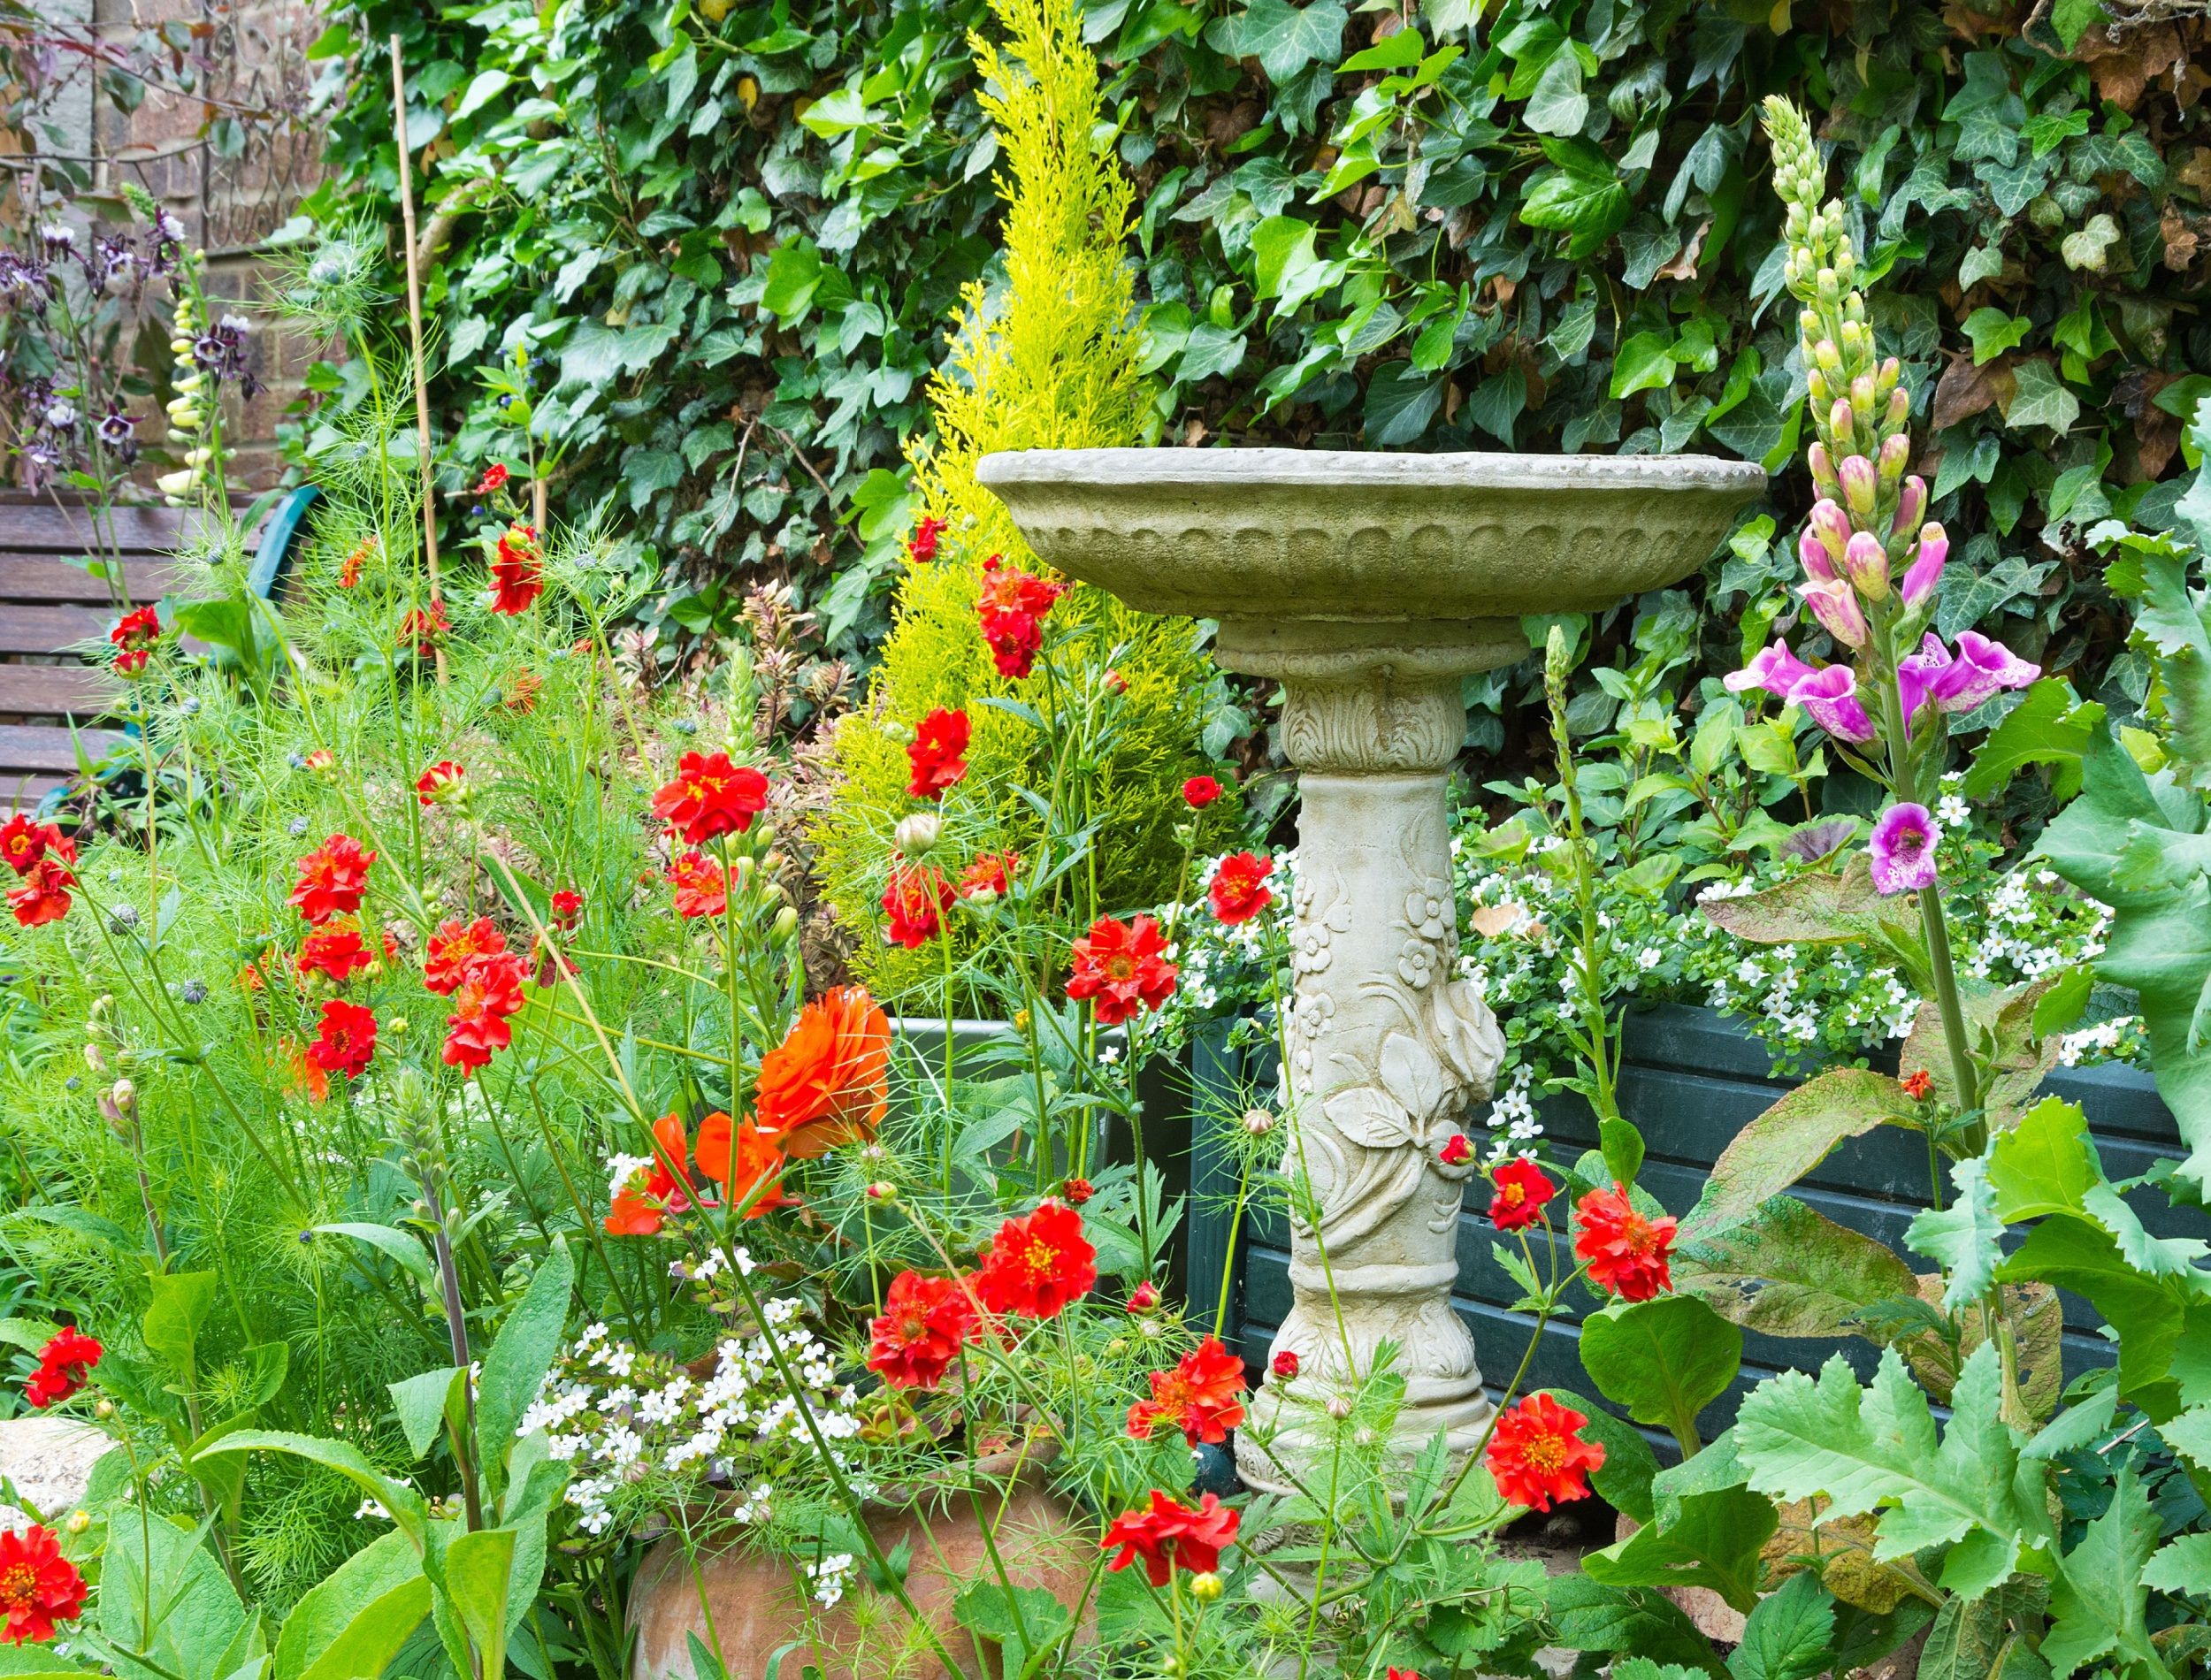 Spring garden with bird bath blooming with different flowers